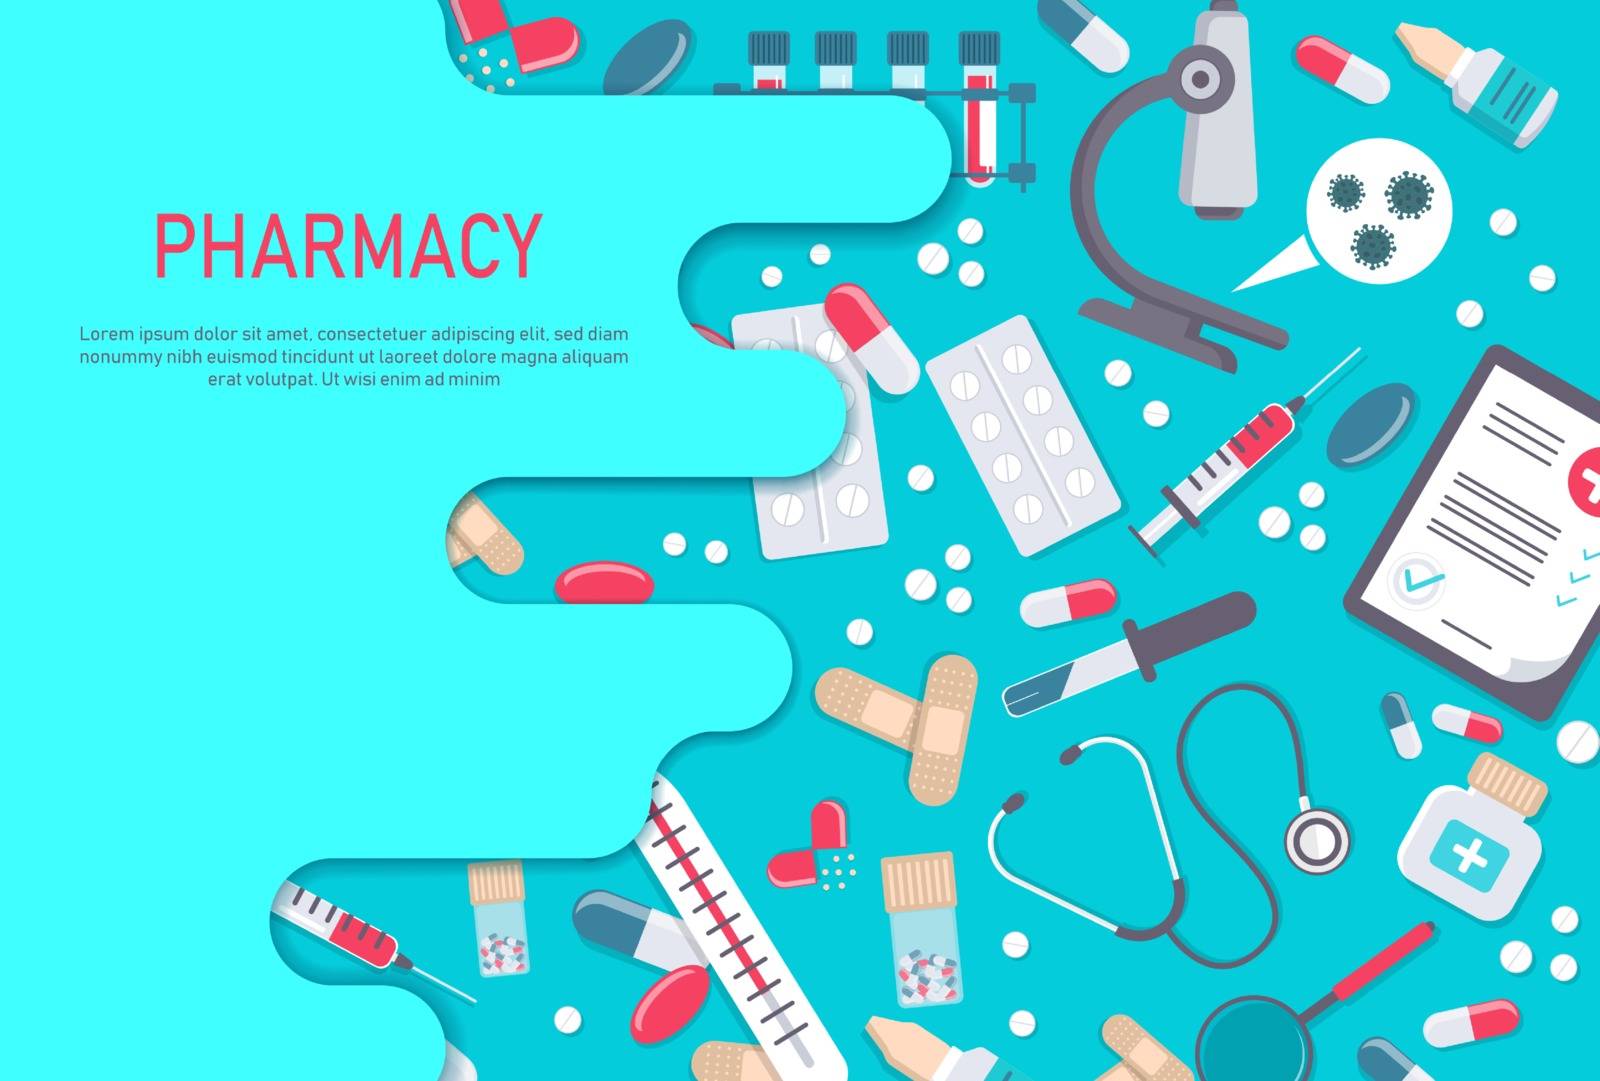 Pharmacy frame with pills, drugs, medical bottles. Drugstore vector flat illustration. Medicine and healthcare banner, poster background with copy space